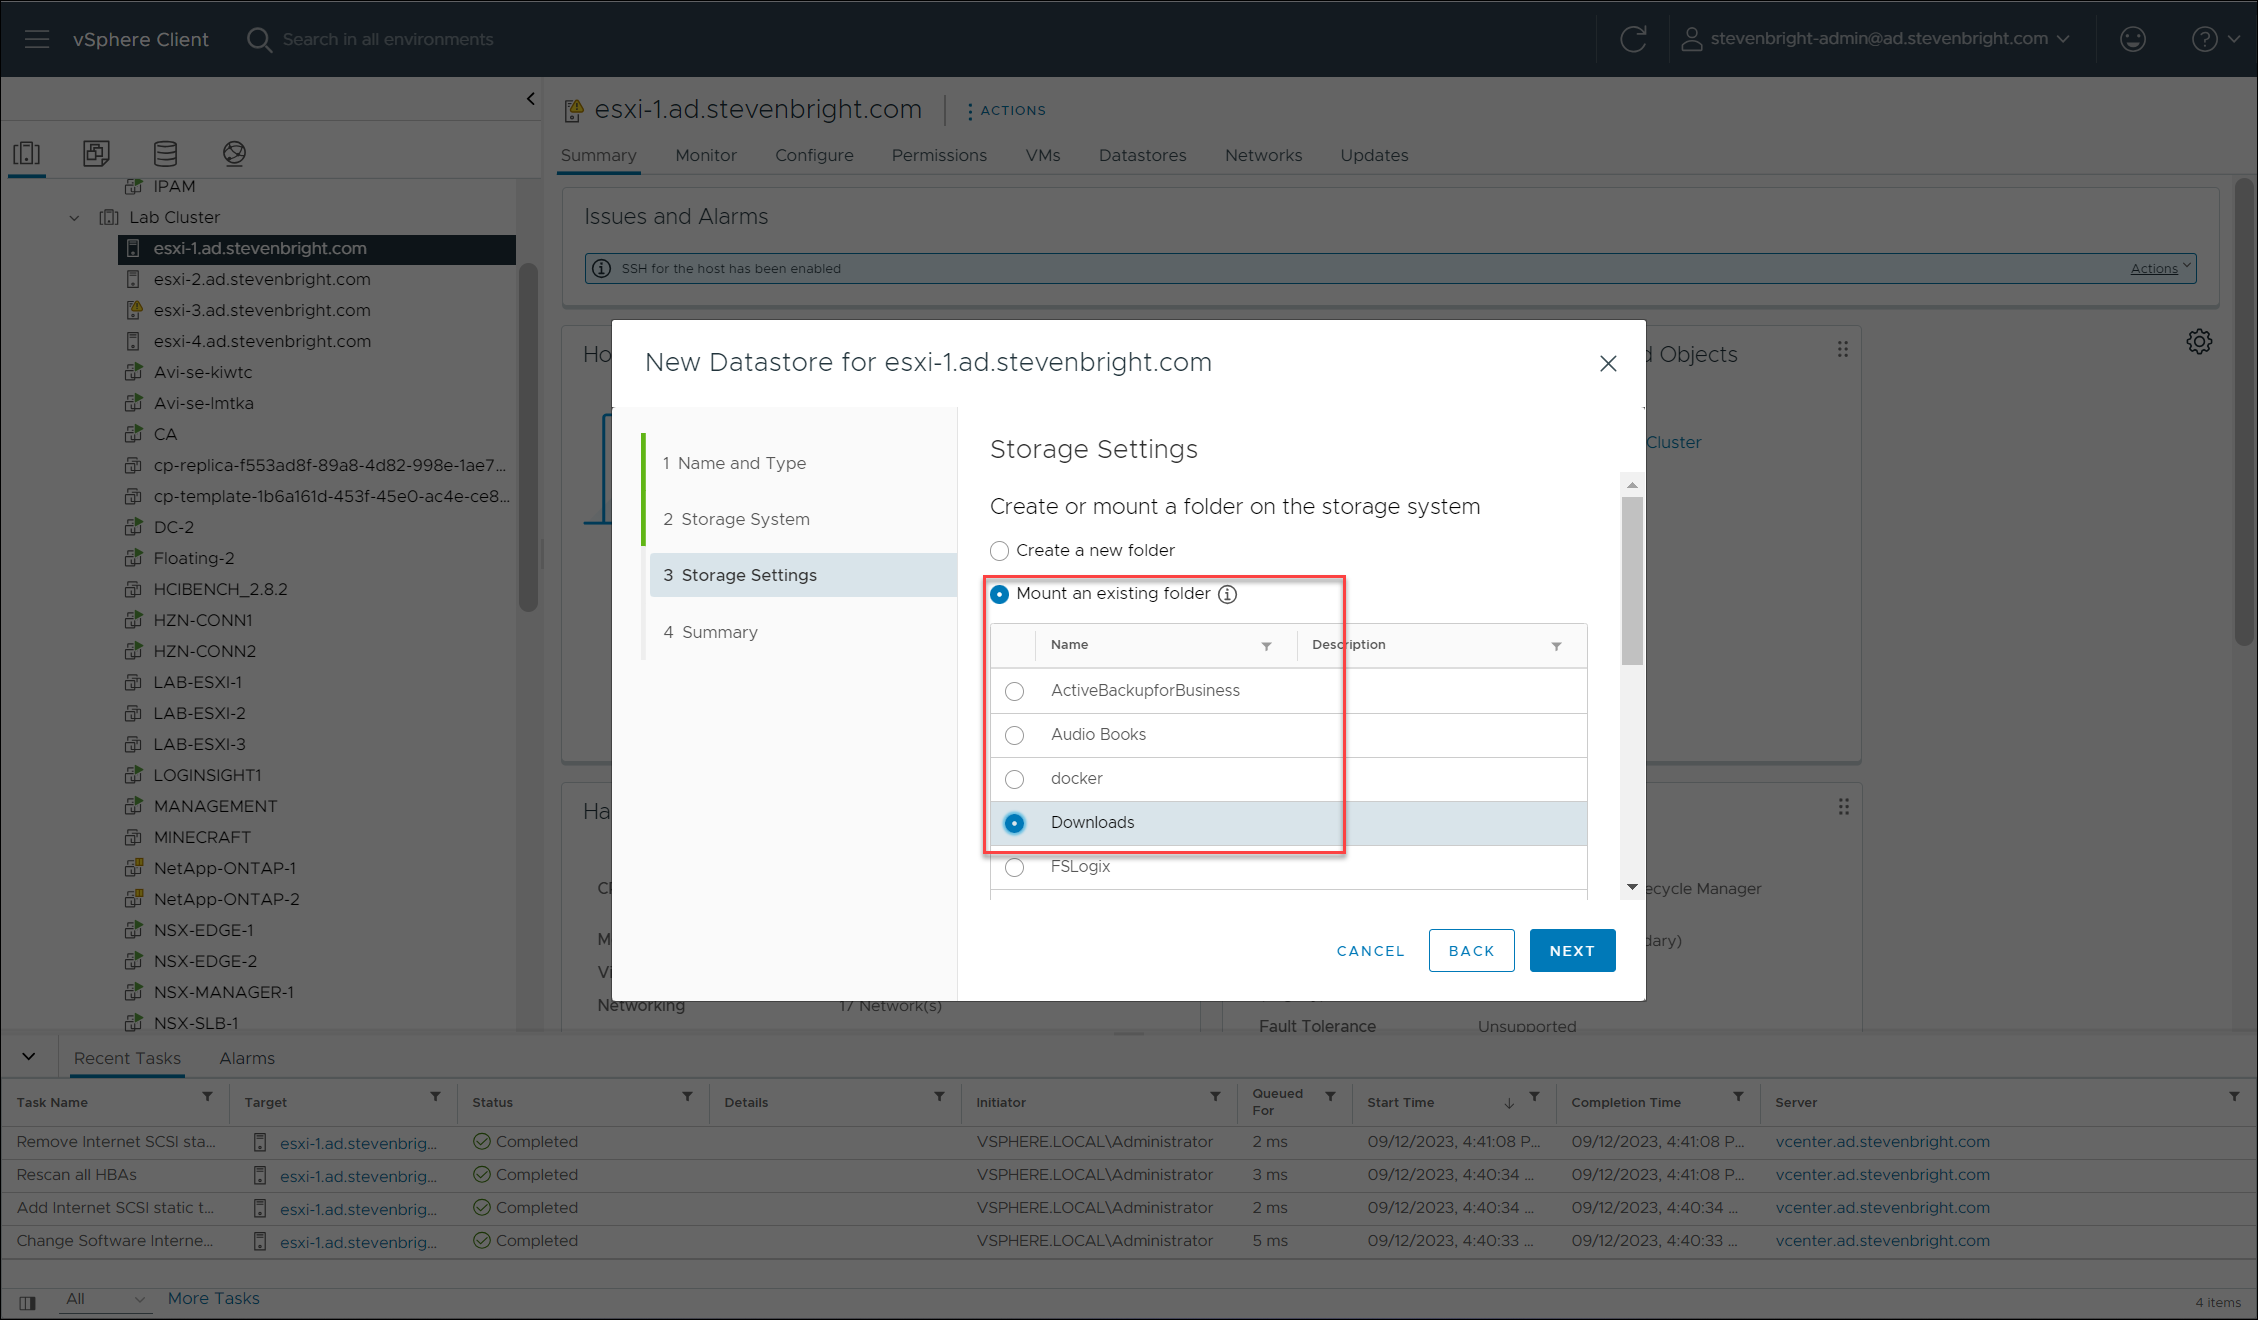 VMware vSphere Client - Synology Storage Console Optimize - New Datastore Wizard - Step 3 - NFS - Existing Folder